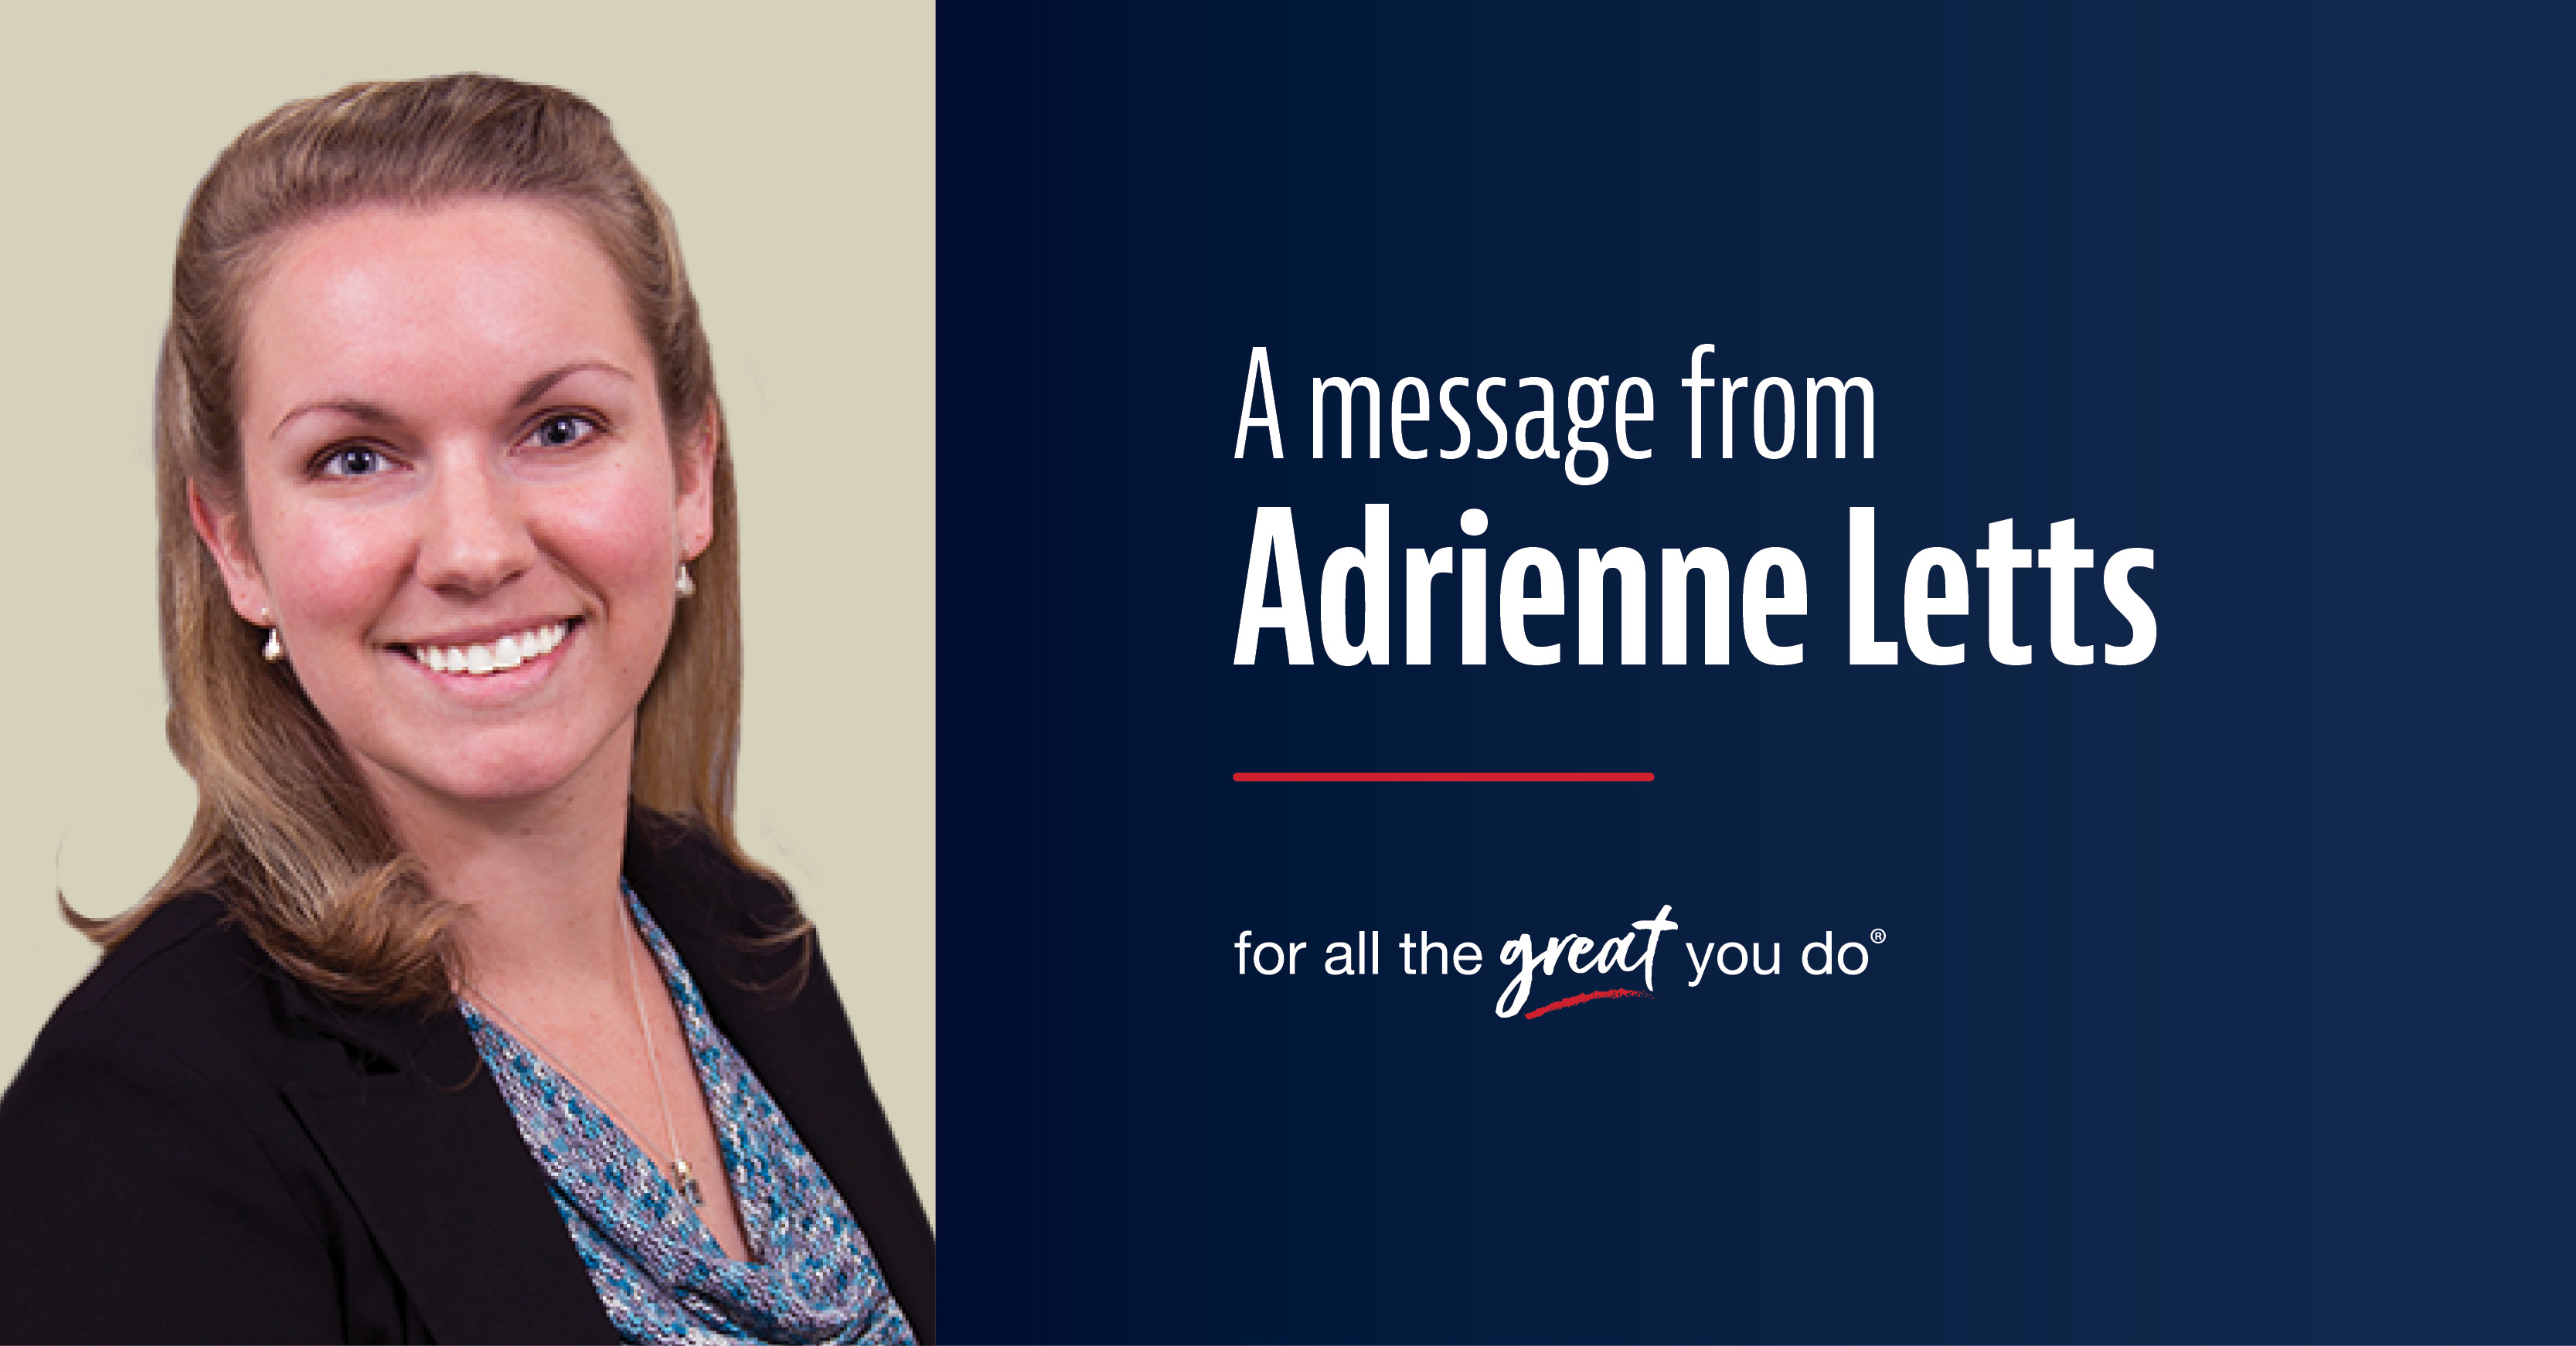 A message from Adrienne Letts